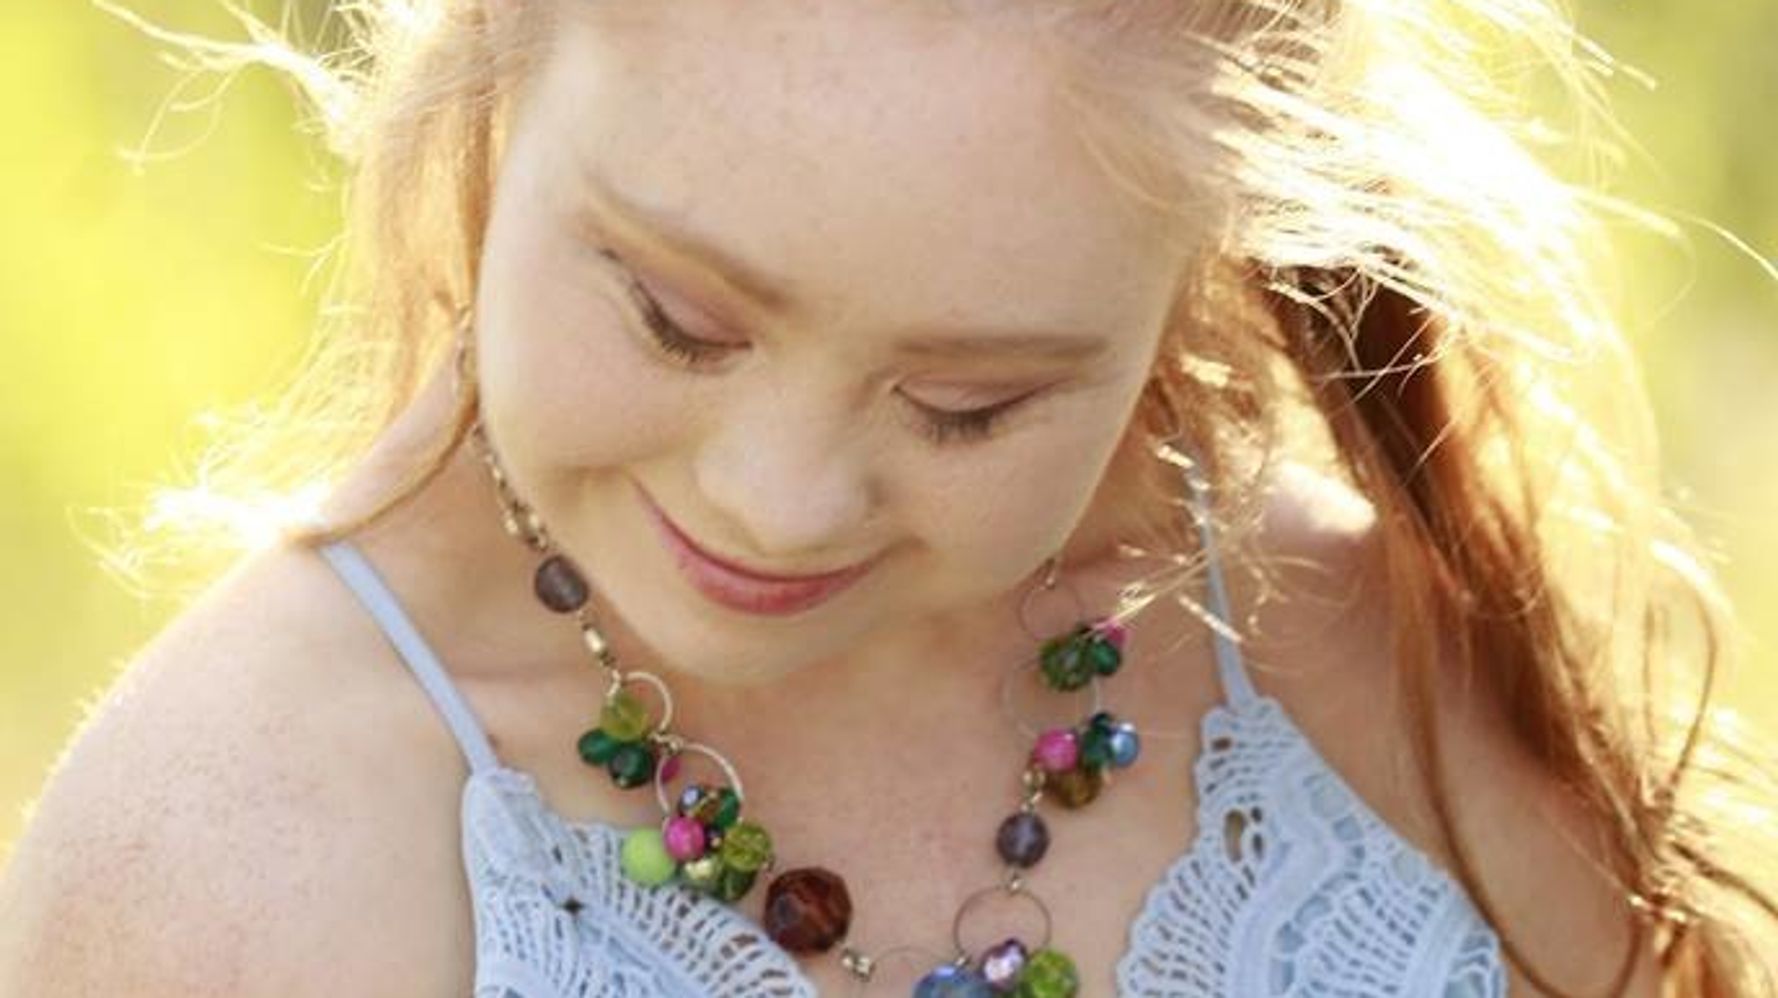 Madeline Stuart 18 Year Old Model With Down Syndrome Will Walk In Nyfw Huffpost Life 